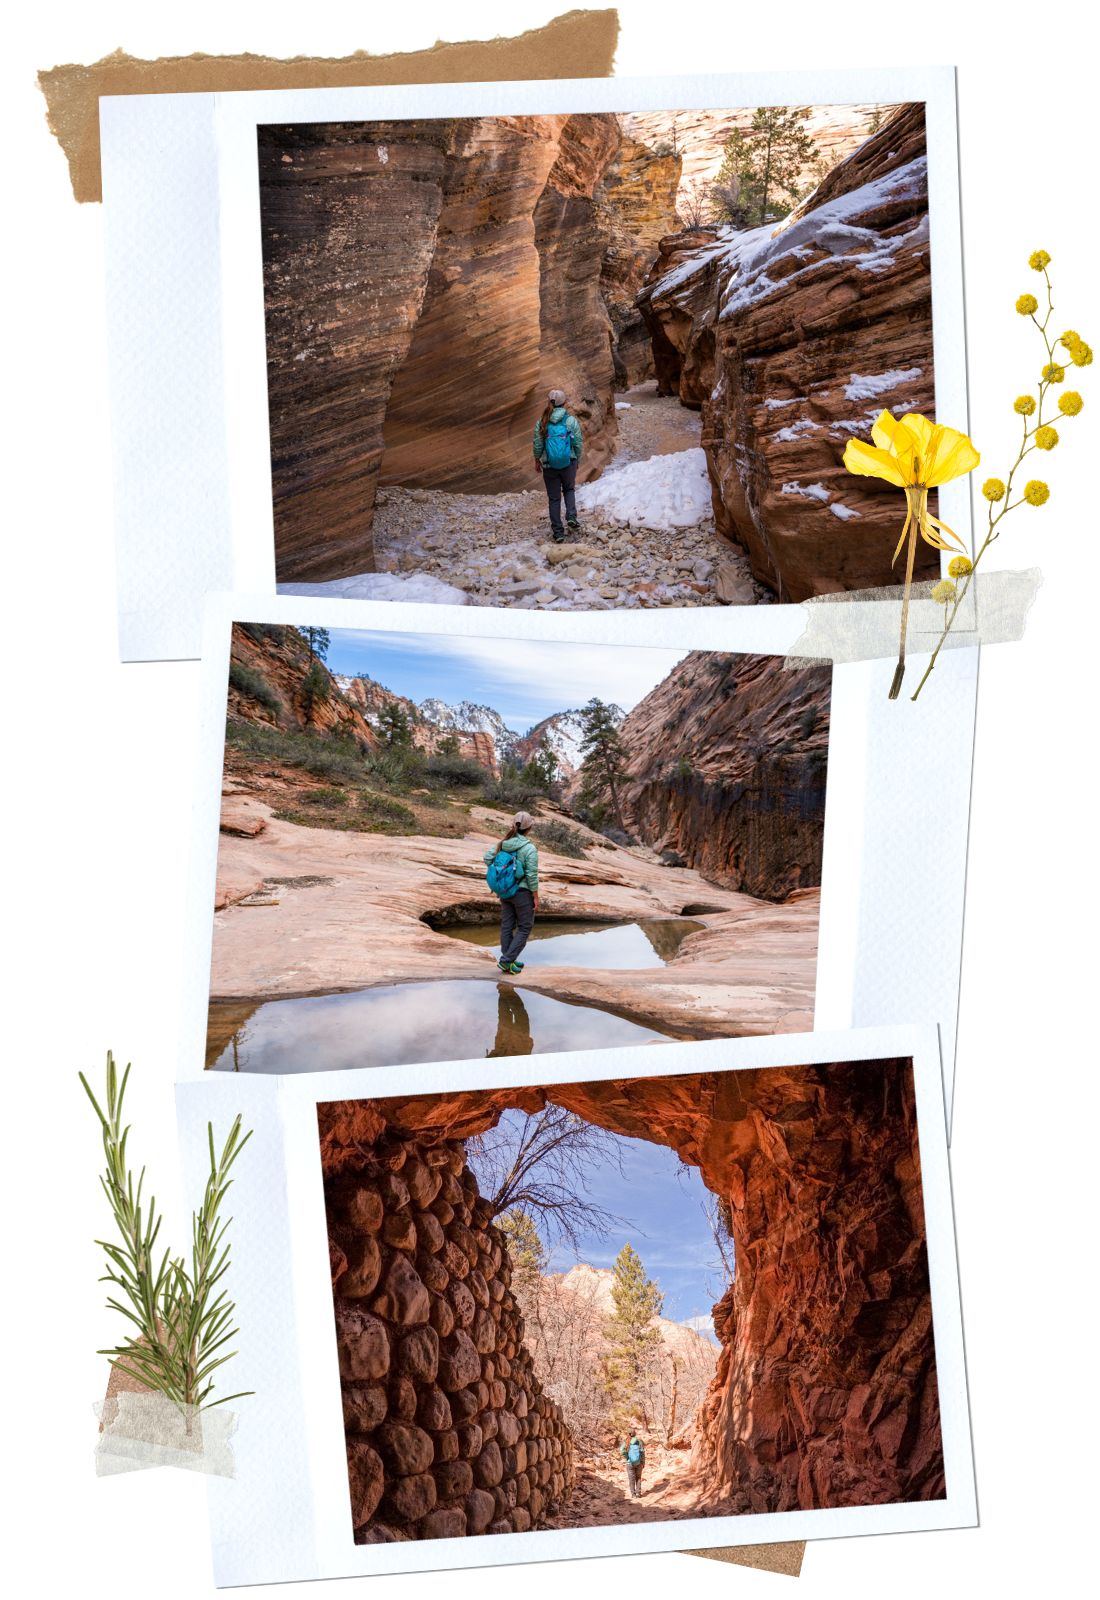 Many Pools Neighbor - 4 Unofficial Hikes in Zion National Park